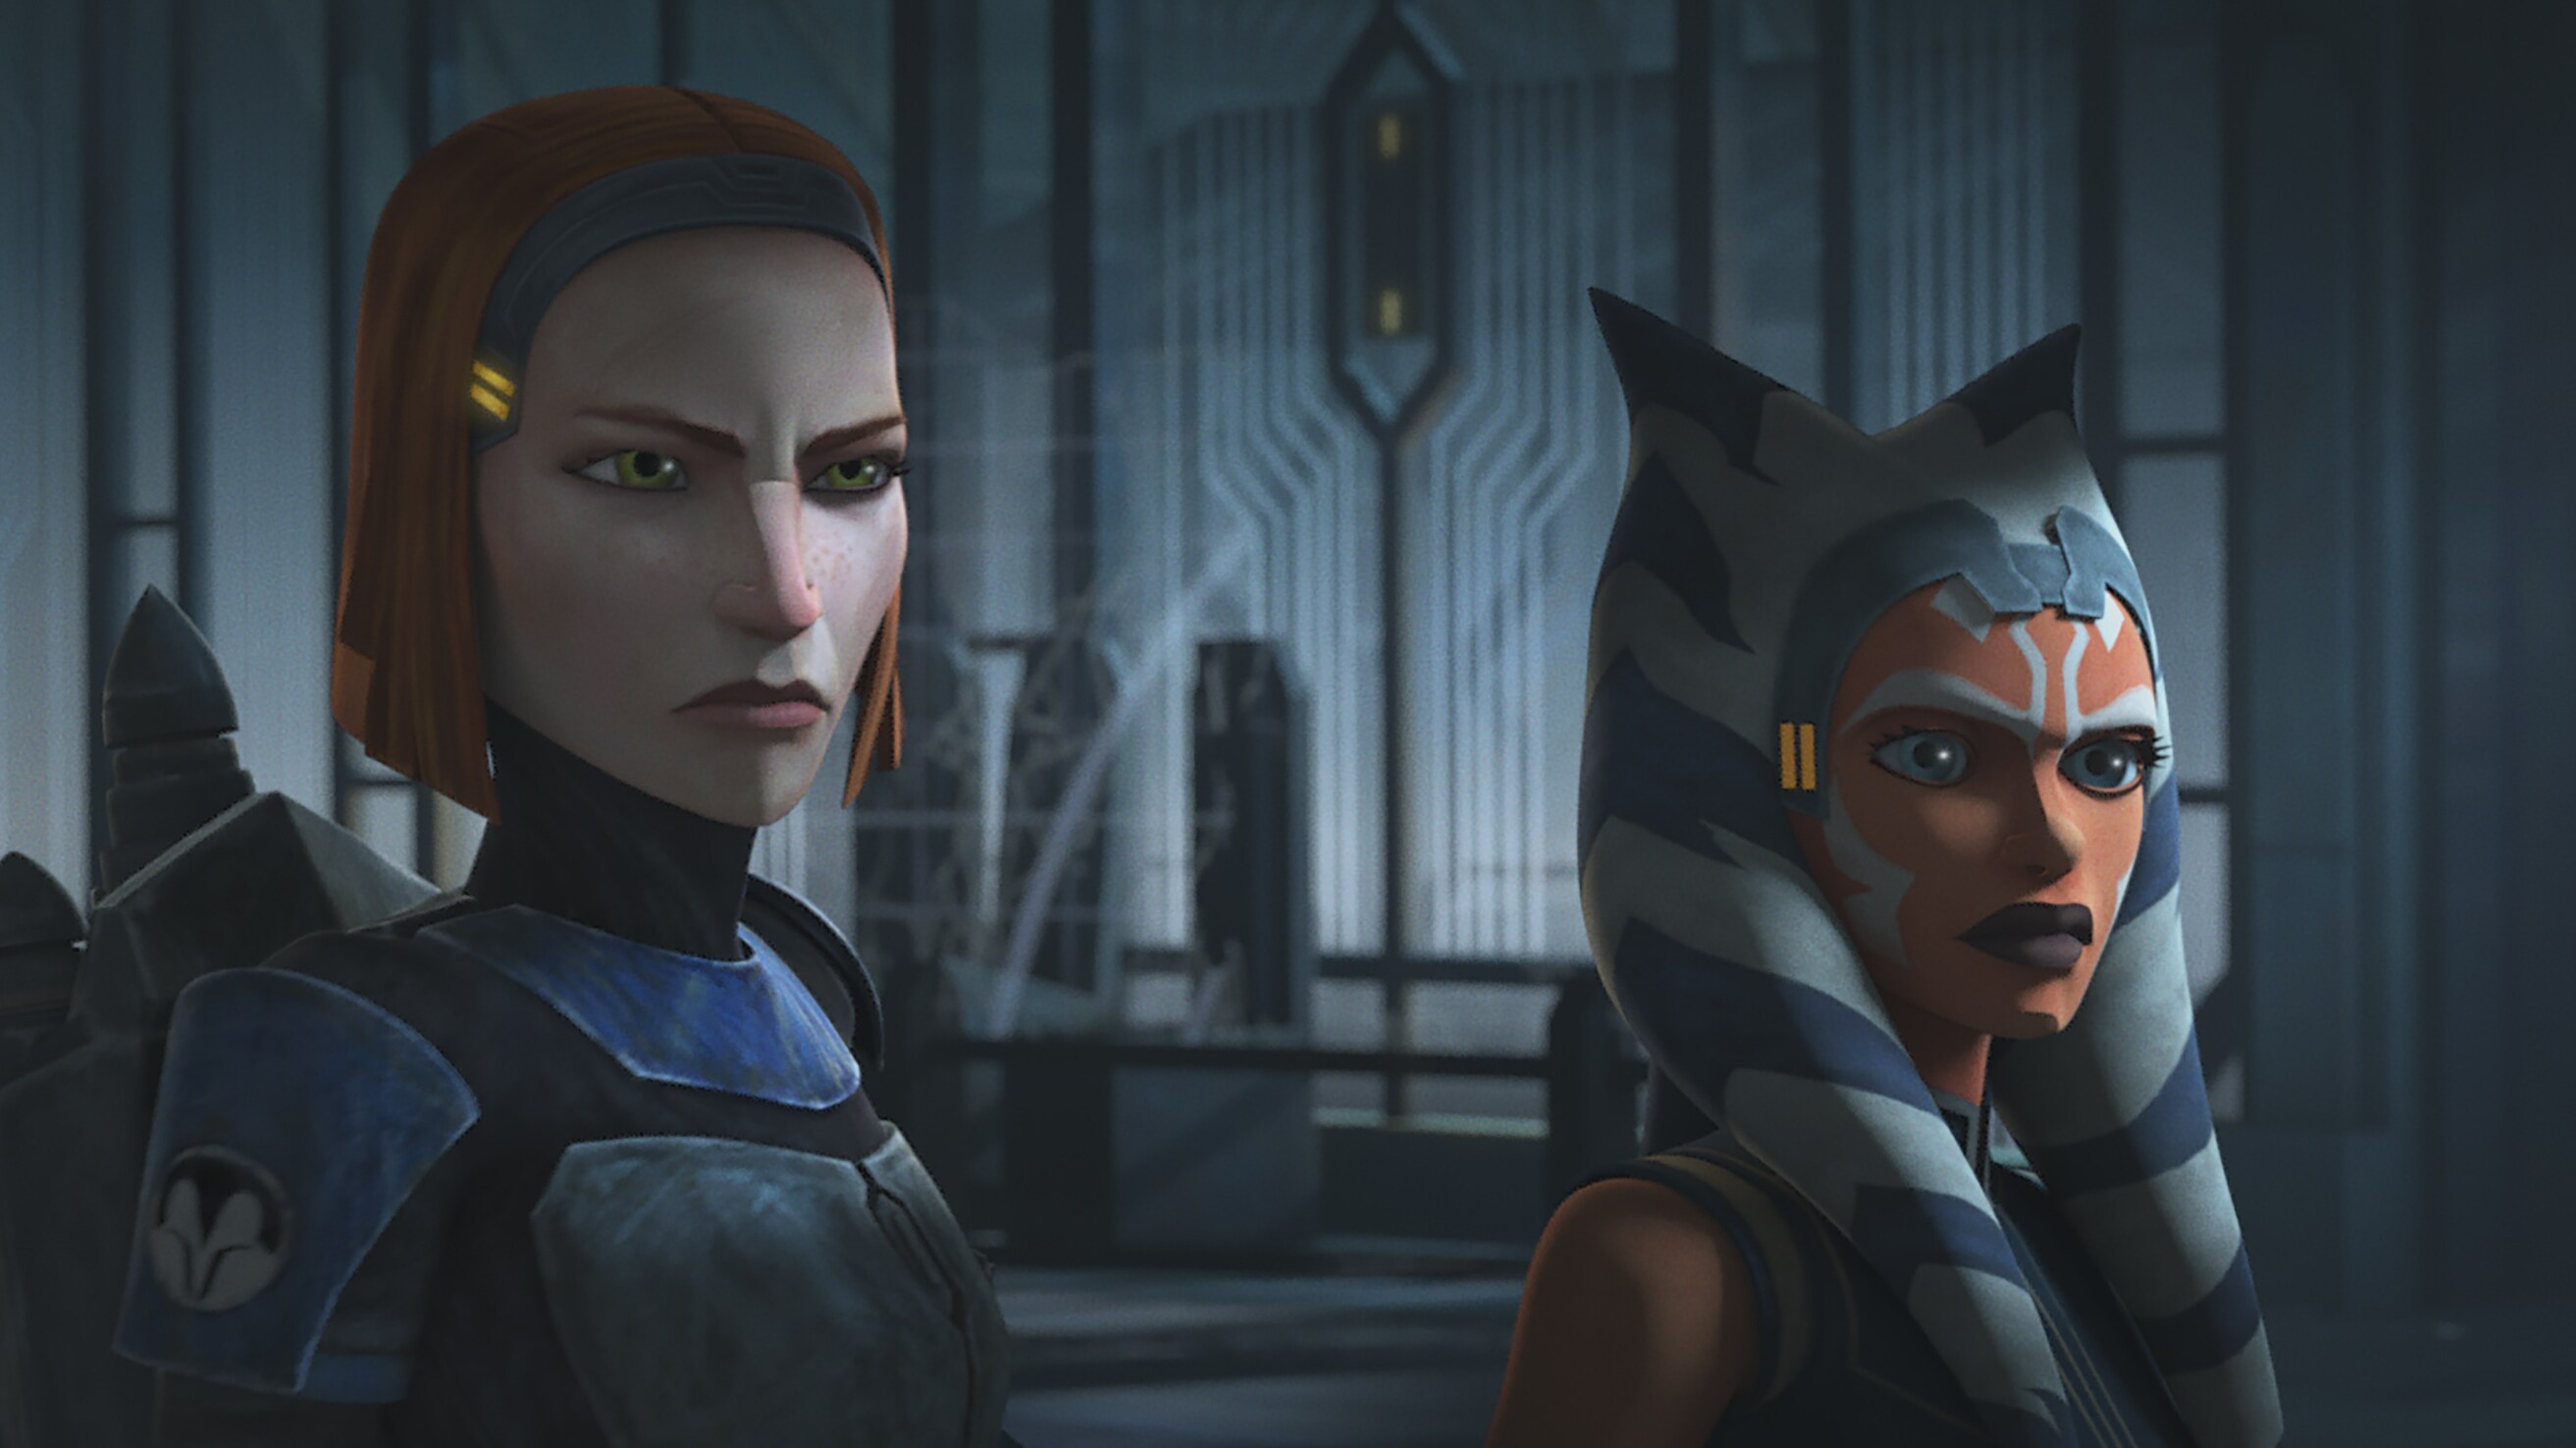 Bo-Katan and Ahsoka confront Maul in STAR WARS: THE CLONE WARS, exclusively on Disney+.